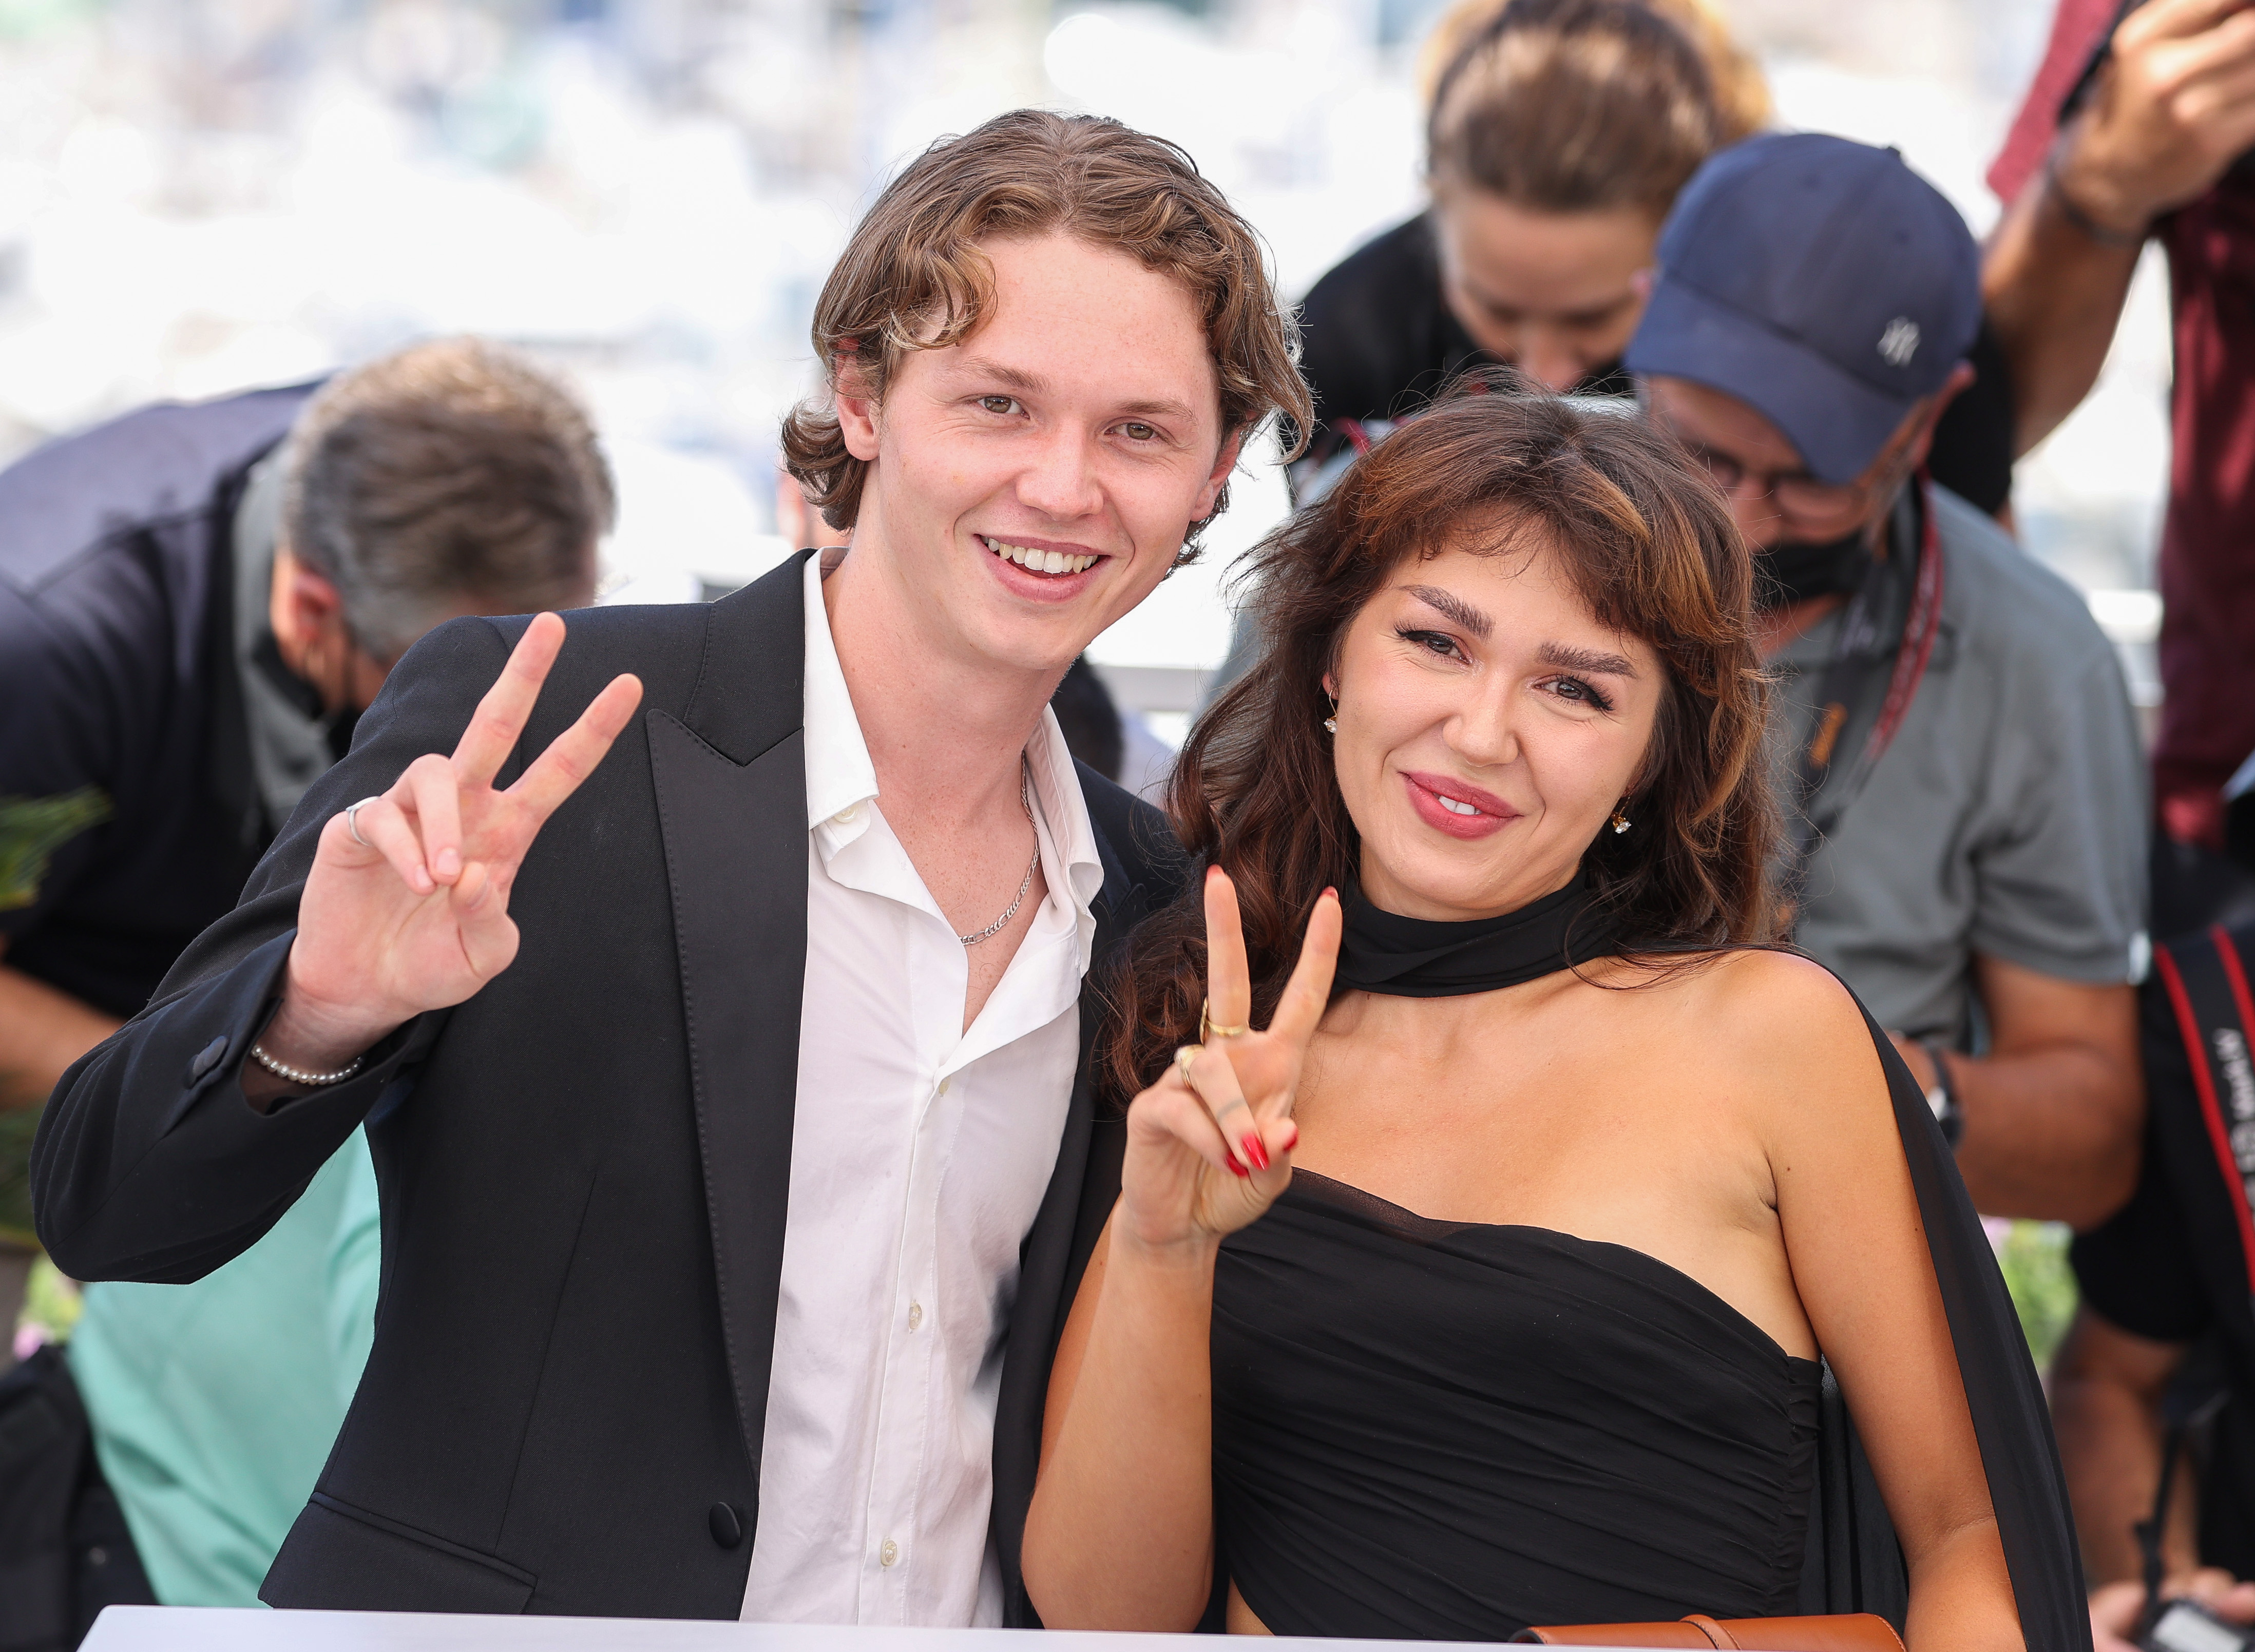 Jack and Mercedes Kilmer attend "Val" photocall during the 74th annual Cannes Film Festival in Cannes, France, on July 7, 2021. | Source: Getty Images